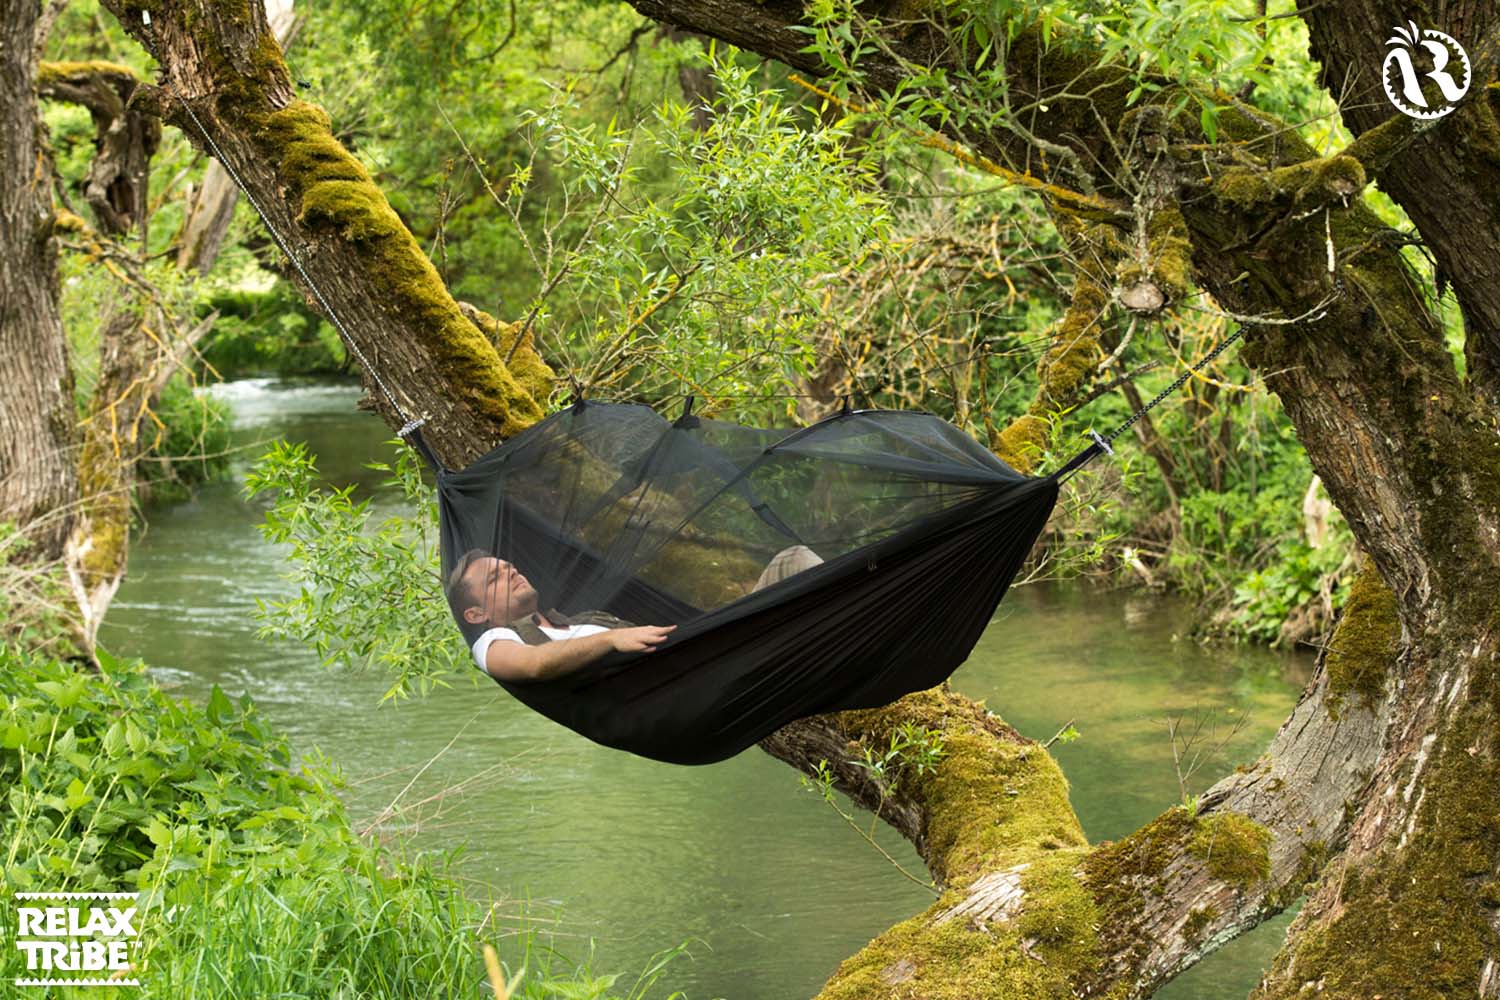 moskito-traveller-extreme-single-portable-travel-hammock-anti-bugs-net-impregnated-outdoor-camping-black-river-trees